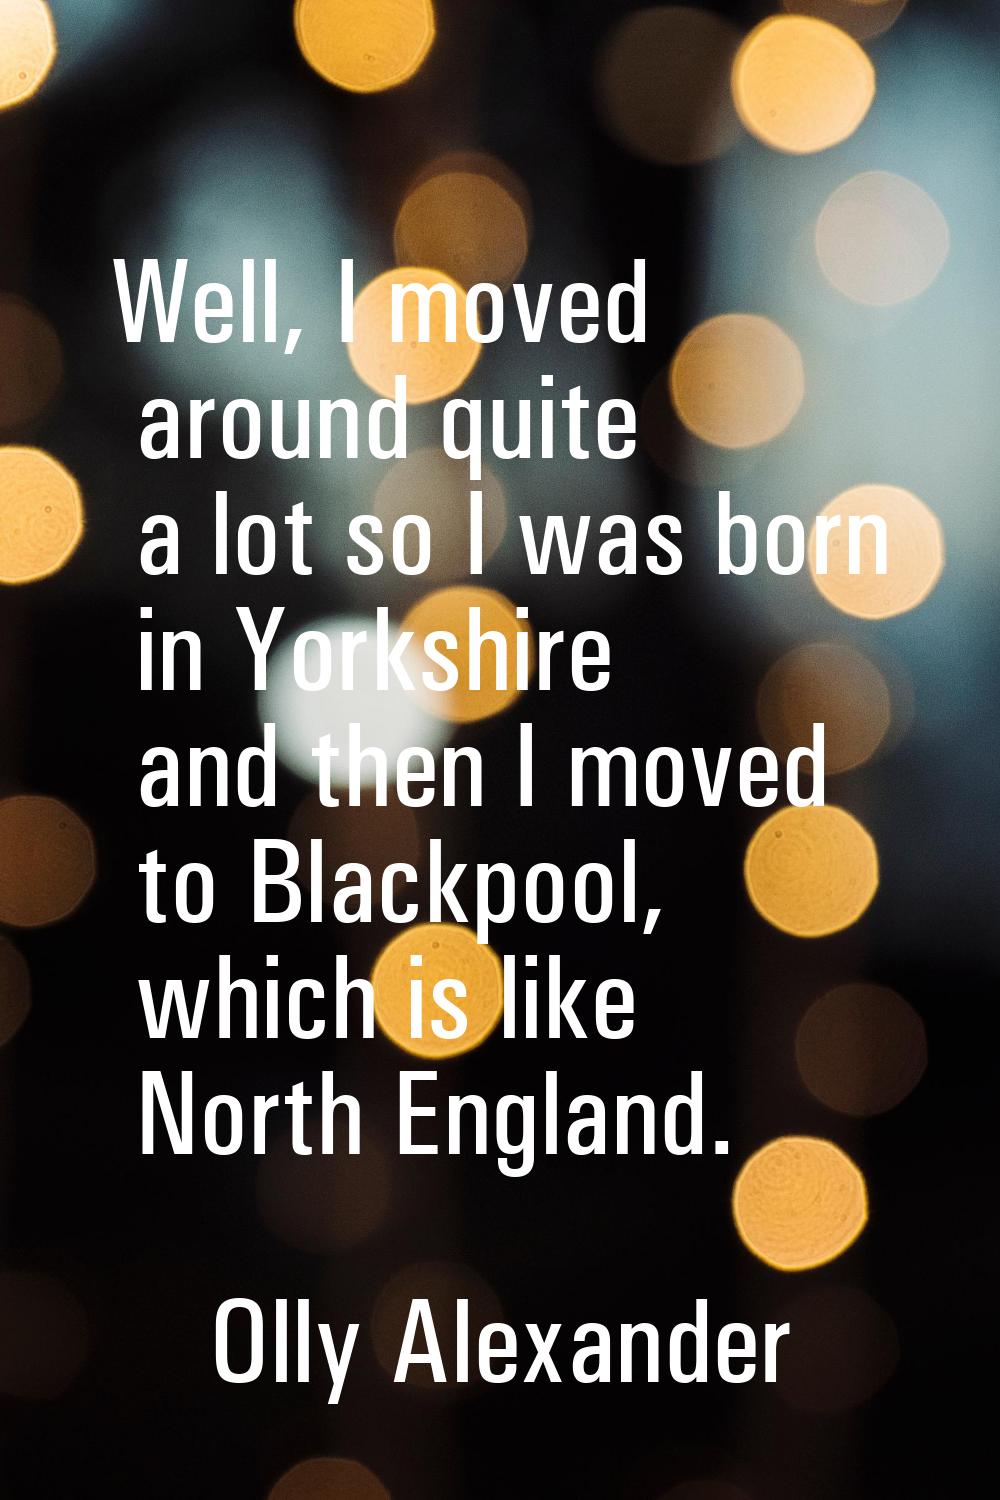 Well, I moved around quite a lot so I was born in Yorkshire and then I moved to Blackpool, which is